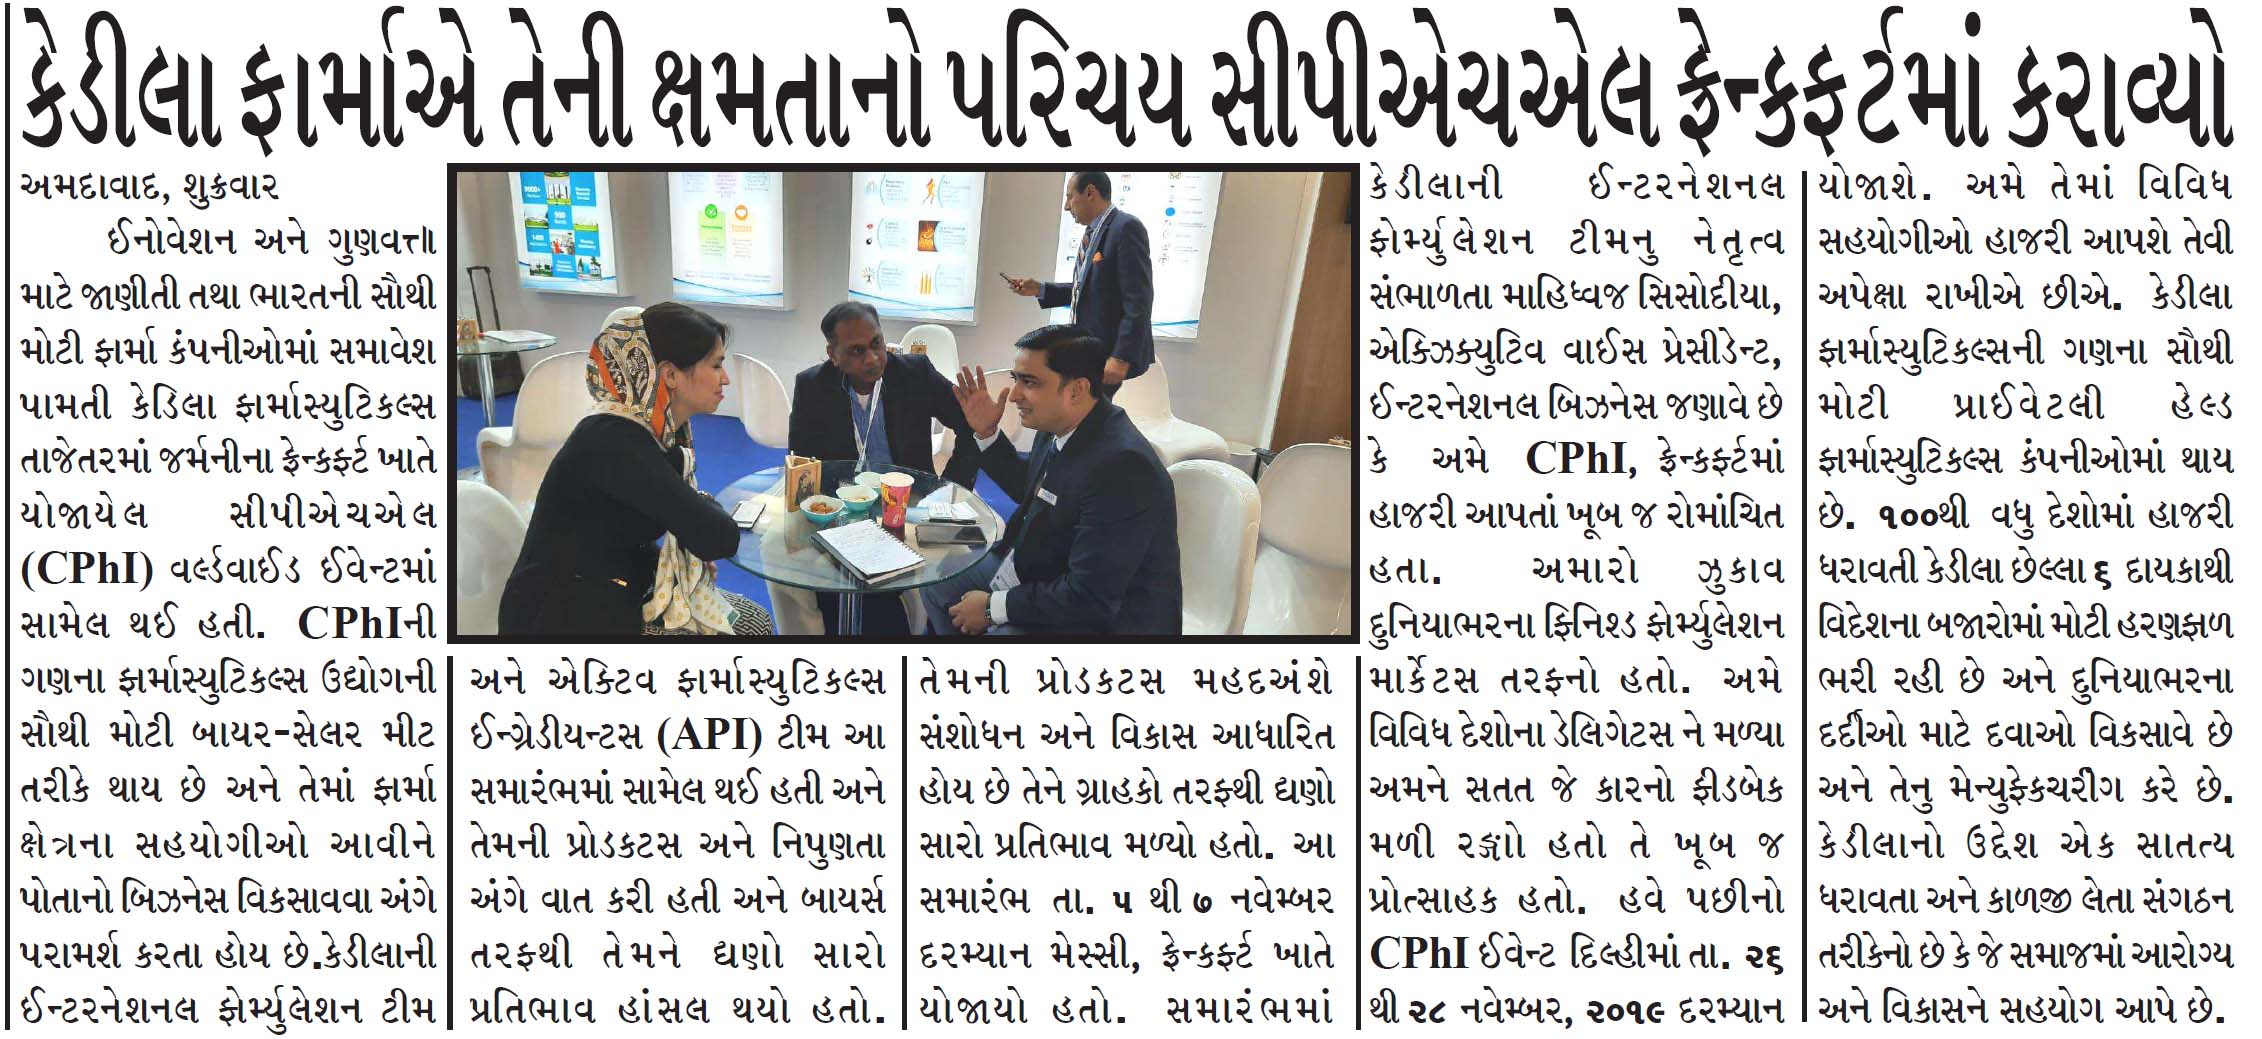 Suryakaal Coverage